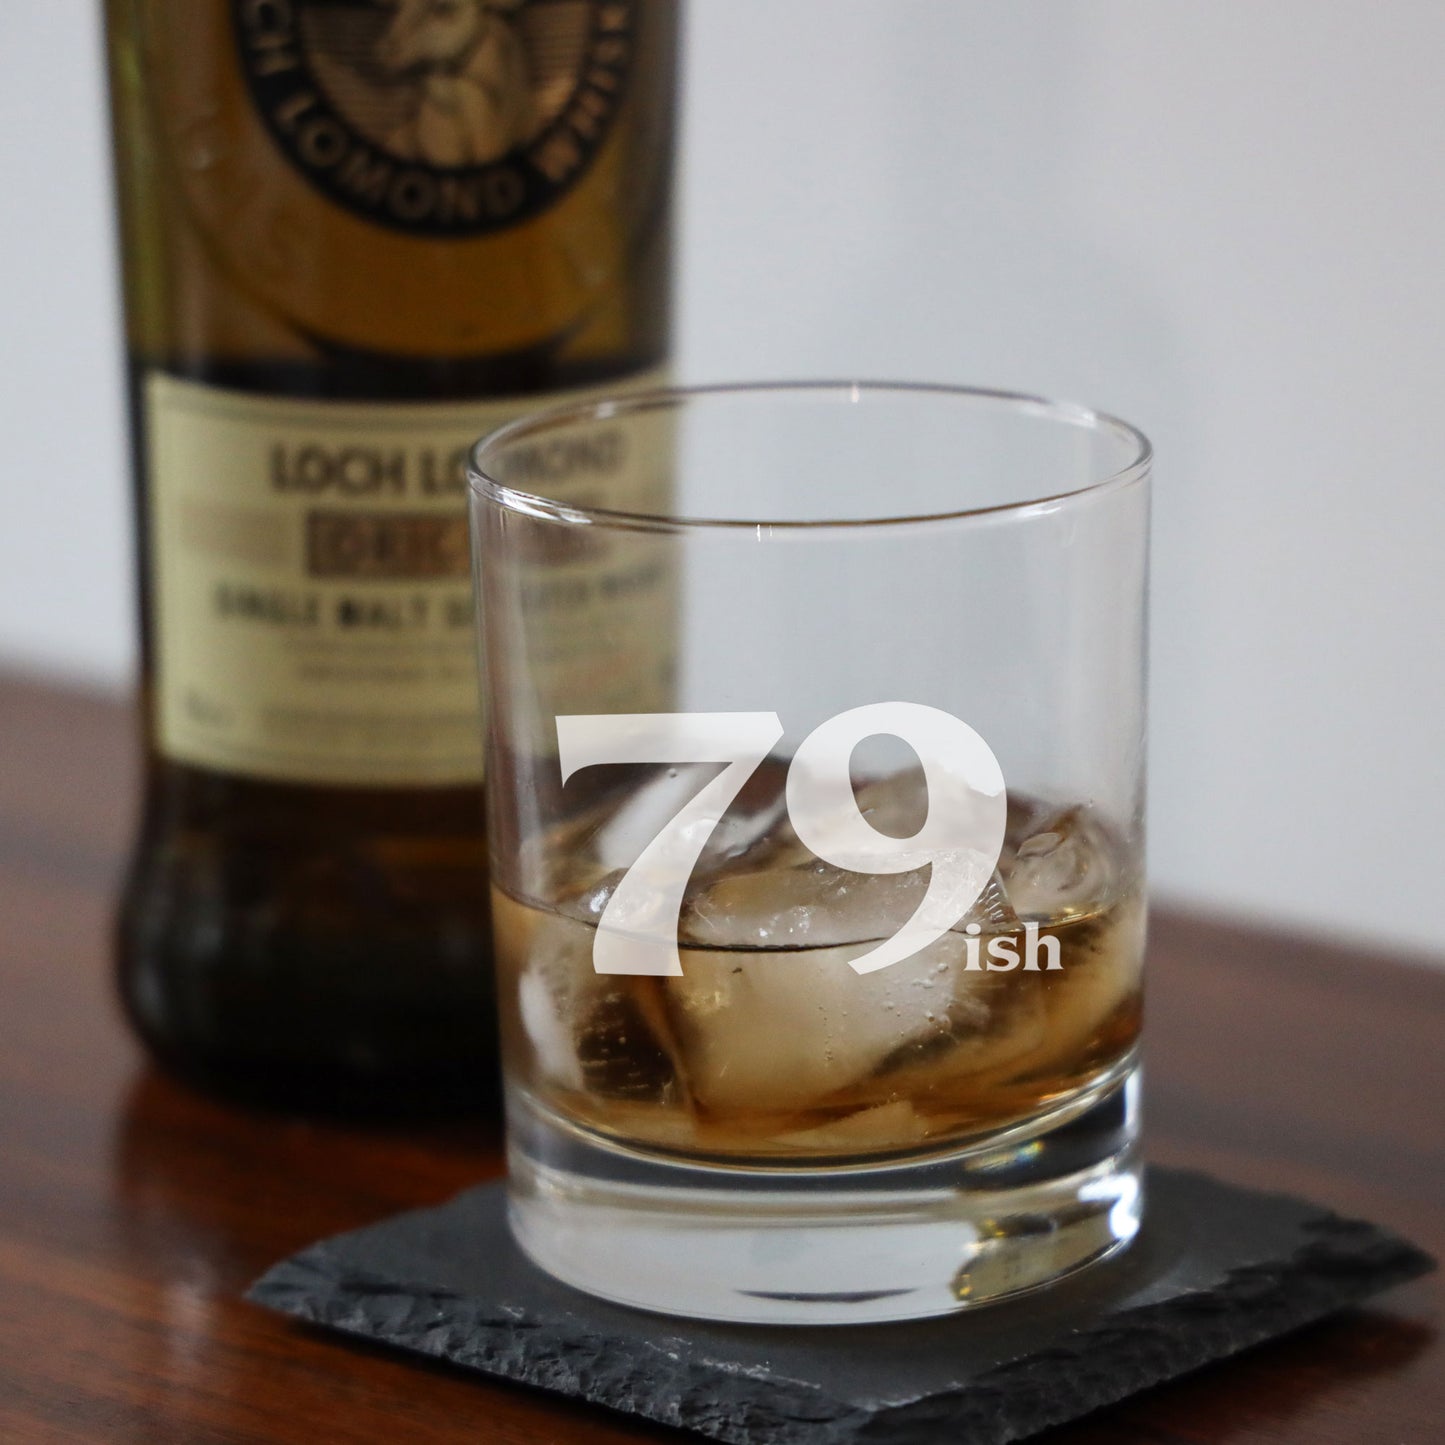 79ish Whisky Glass and/or Coaster Set  - Always Looking Good -   